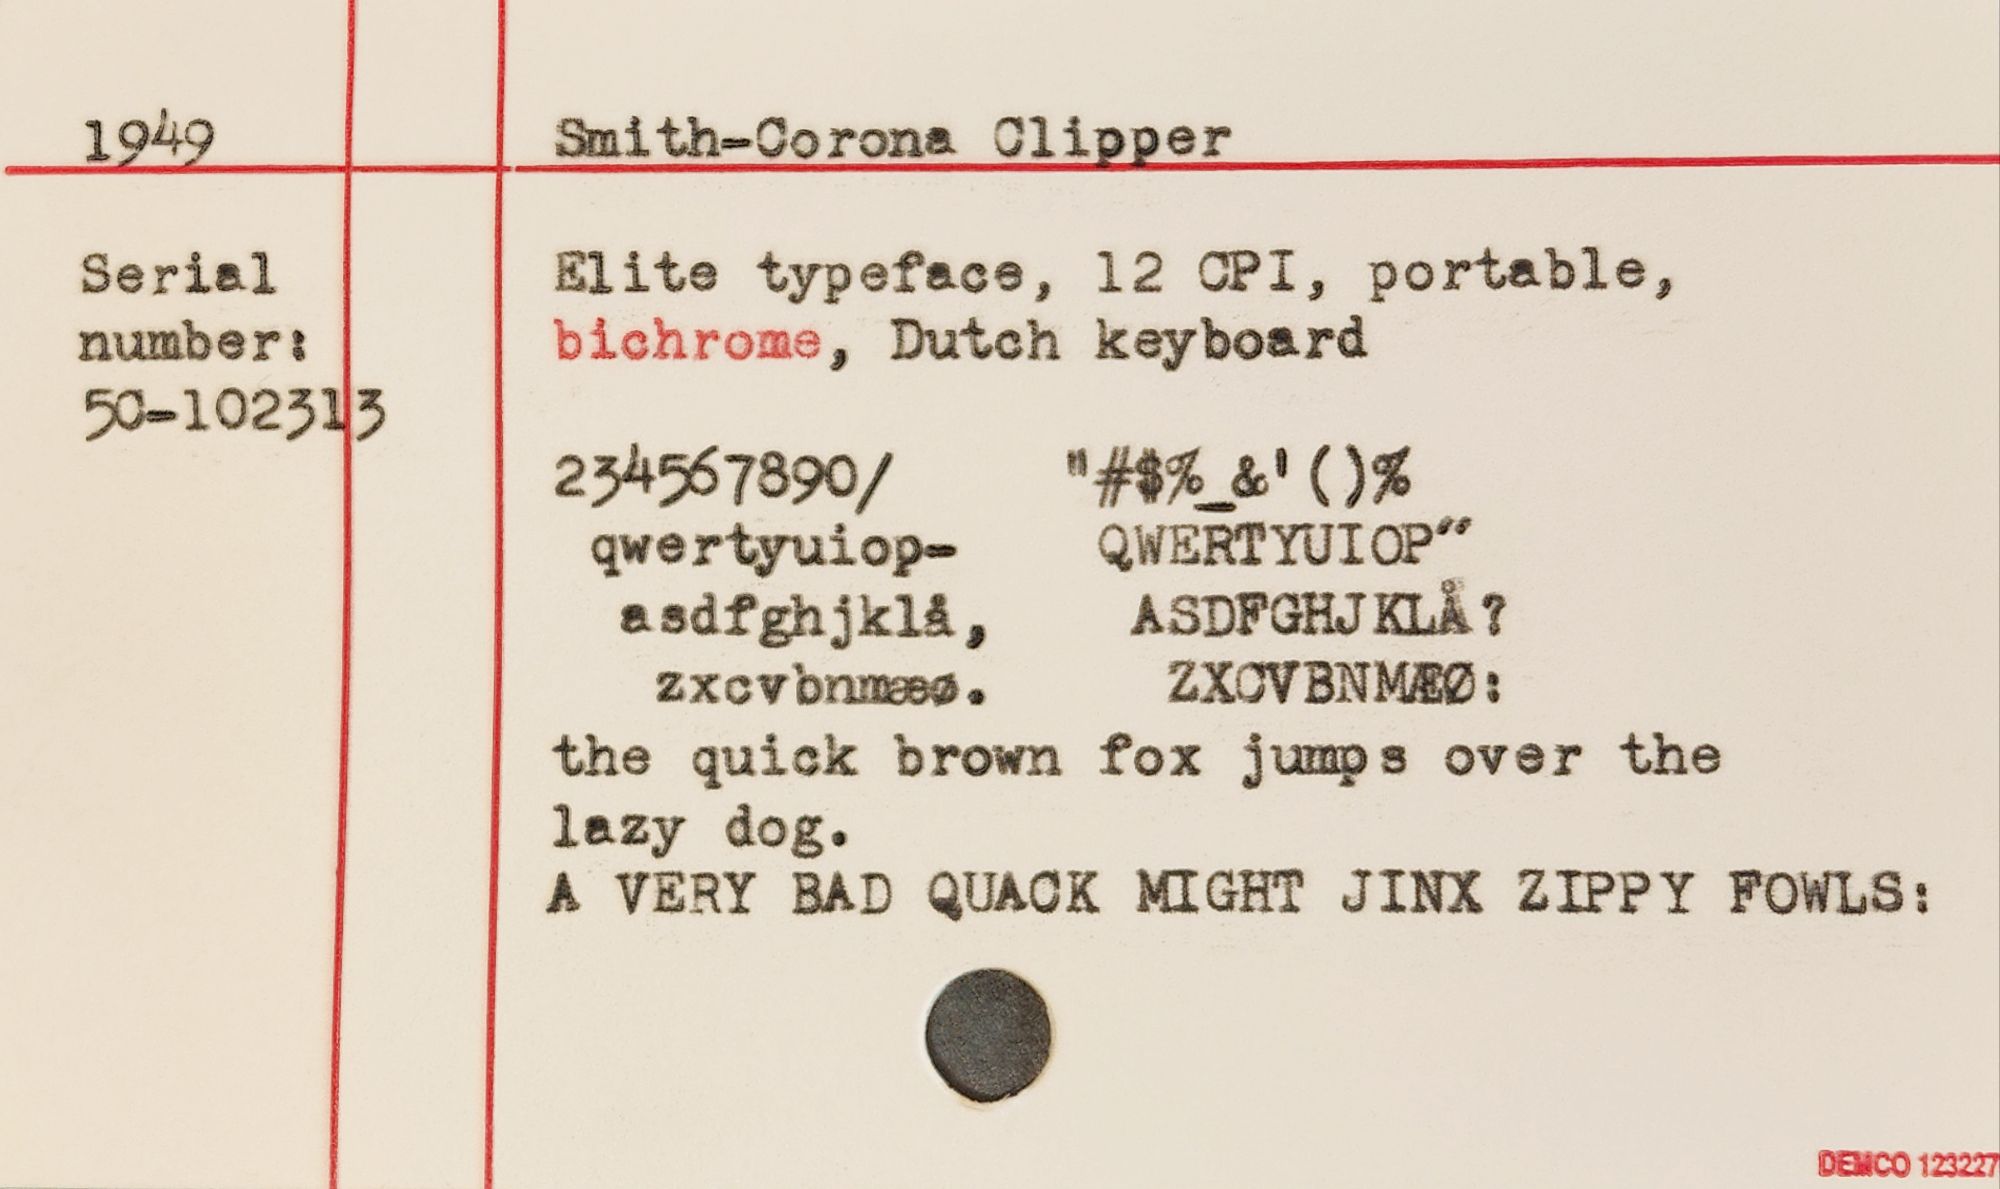 3x5 inch index card with a type sample that reads: 
1949 Serial number: 5C-102313 Smith-Corona Clipper 
Elite typeface, 12 CPI, portable, bichrome, Dutch keyboard 234567890/ qwertyuiop- asdfghjklå, zxcvbnme. 